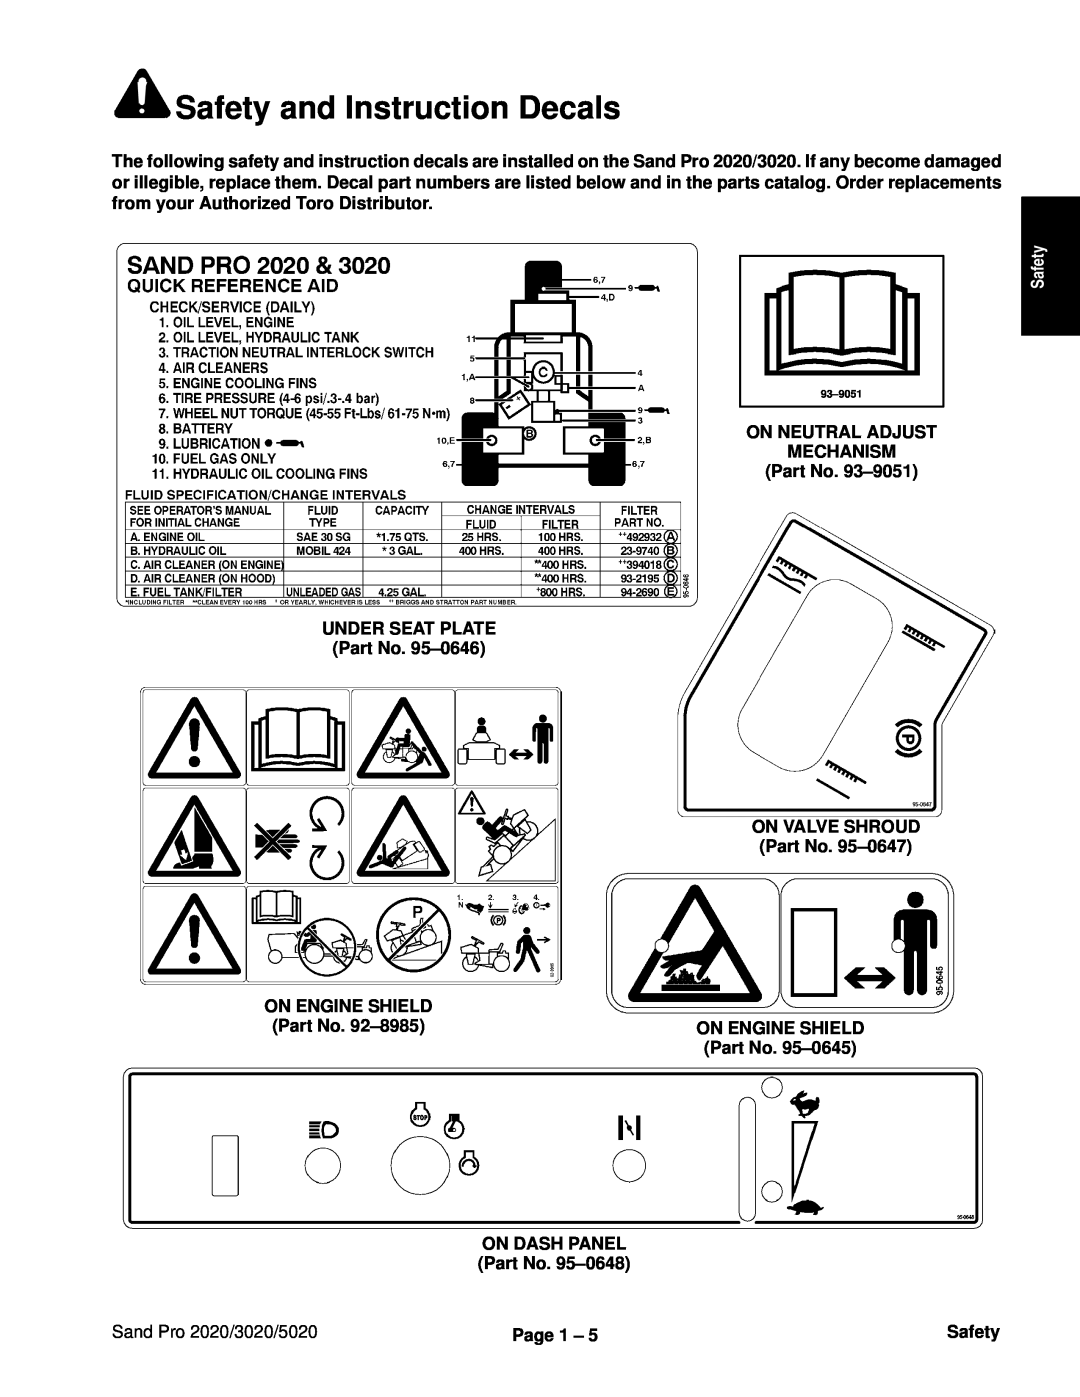 Toro 5020 Safety and Instruction Decals, On Neutral Adjust Mechanism, Under Seat Plate, ON VALVE SHROUD Part No, Page 1 